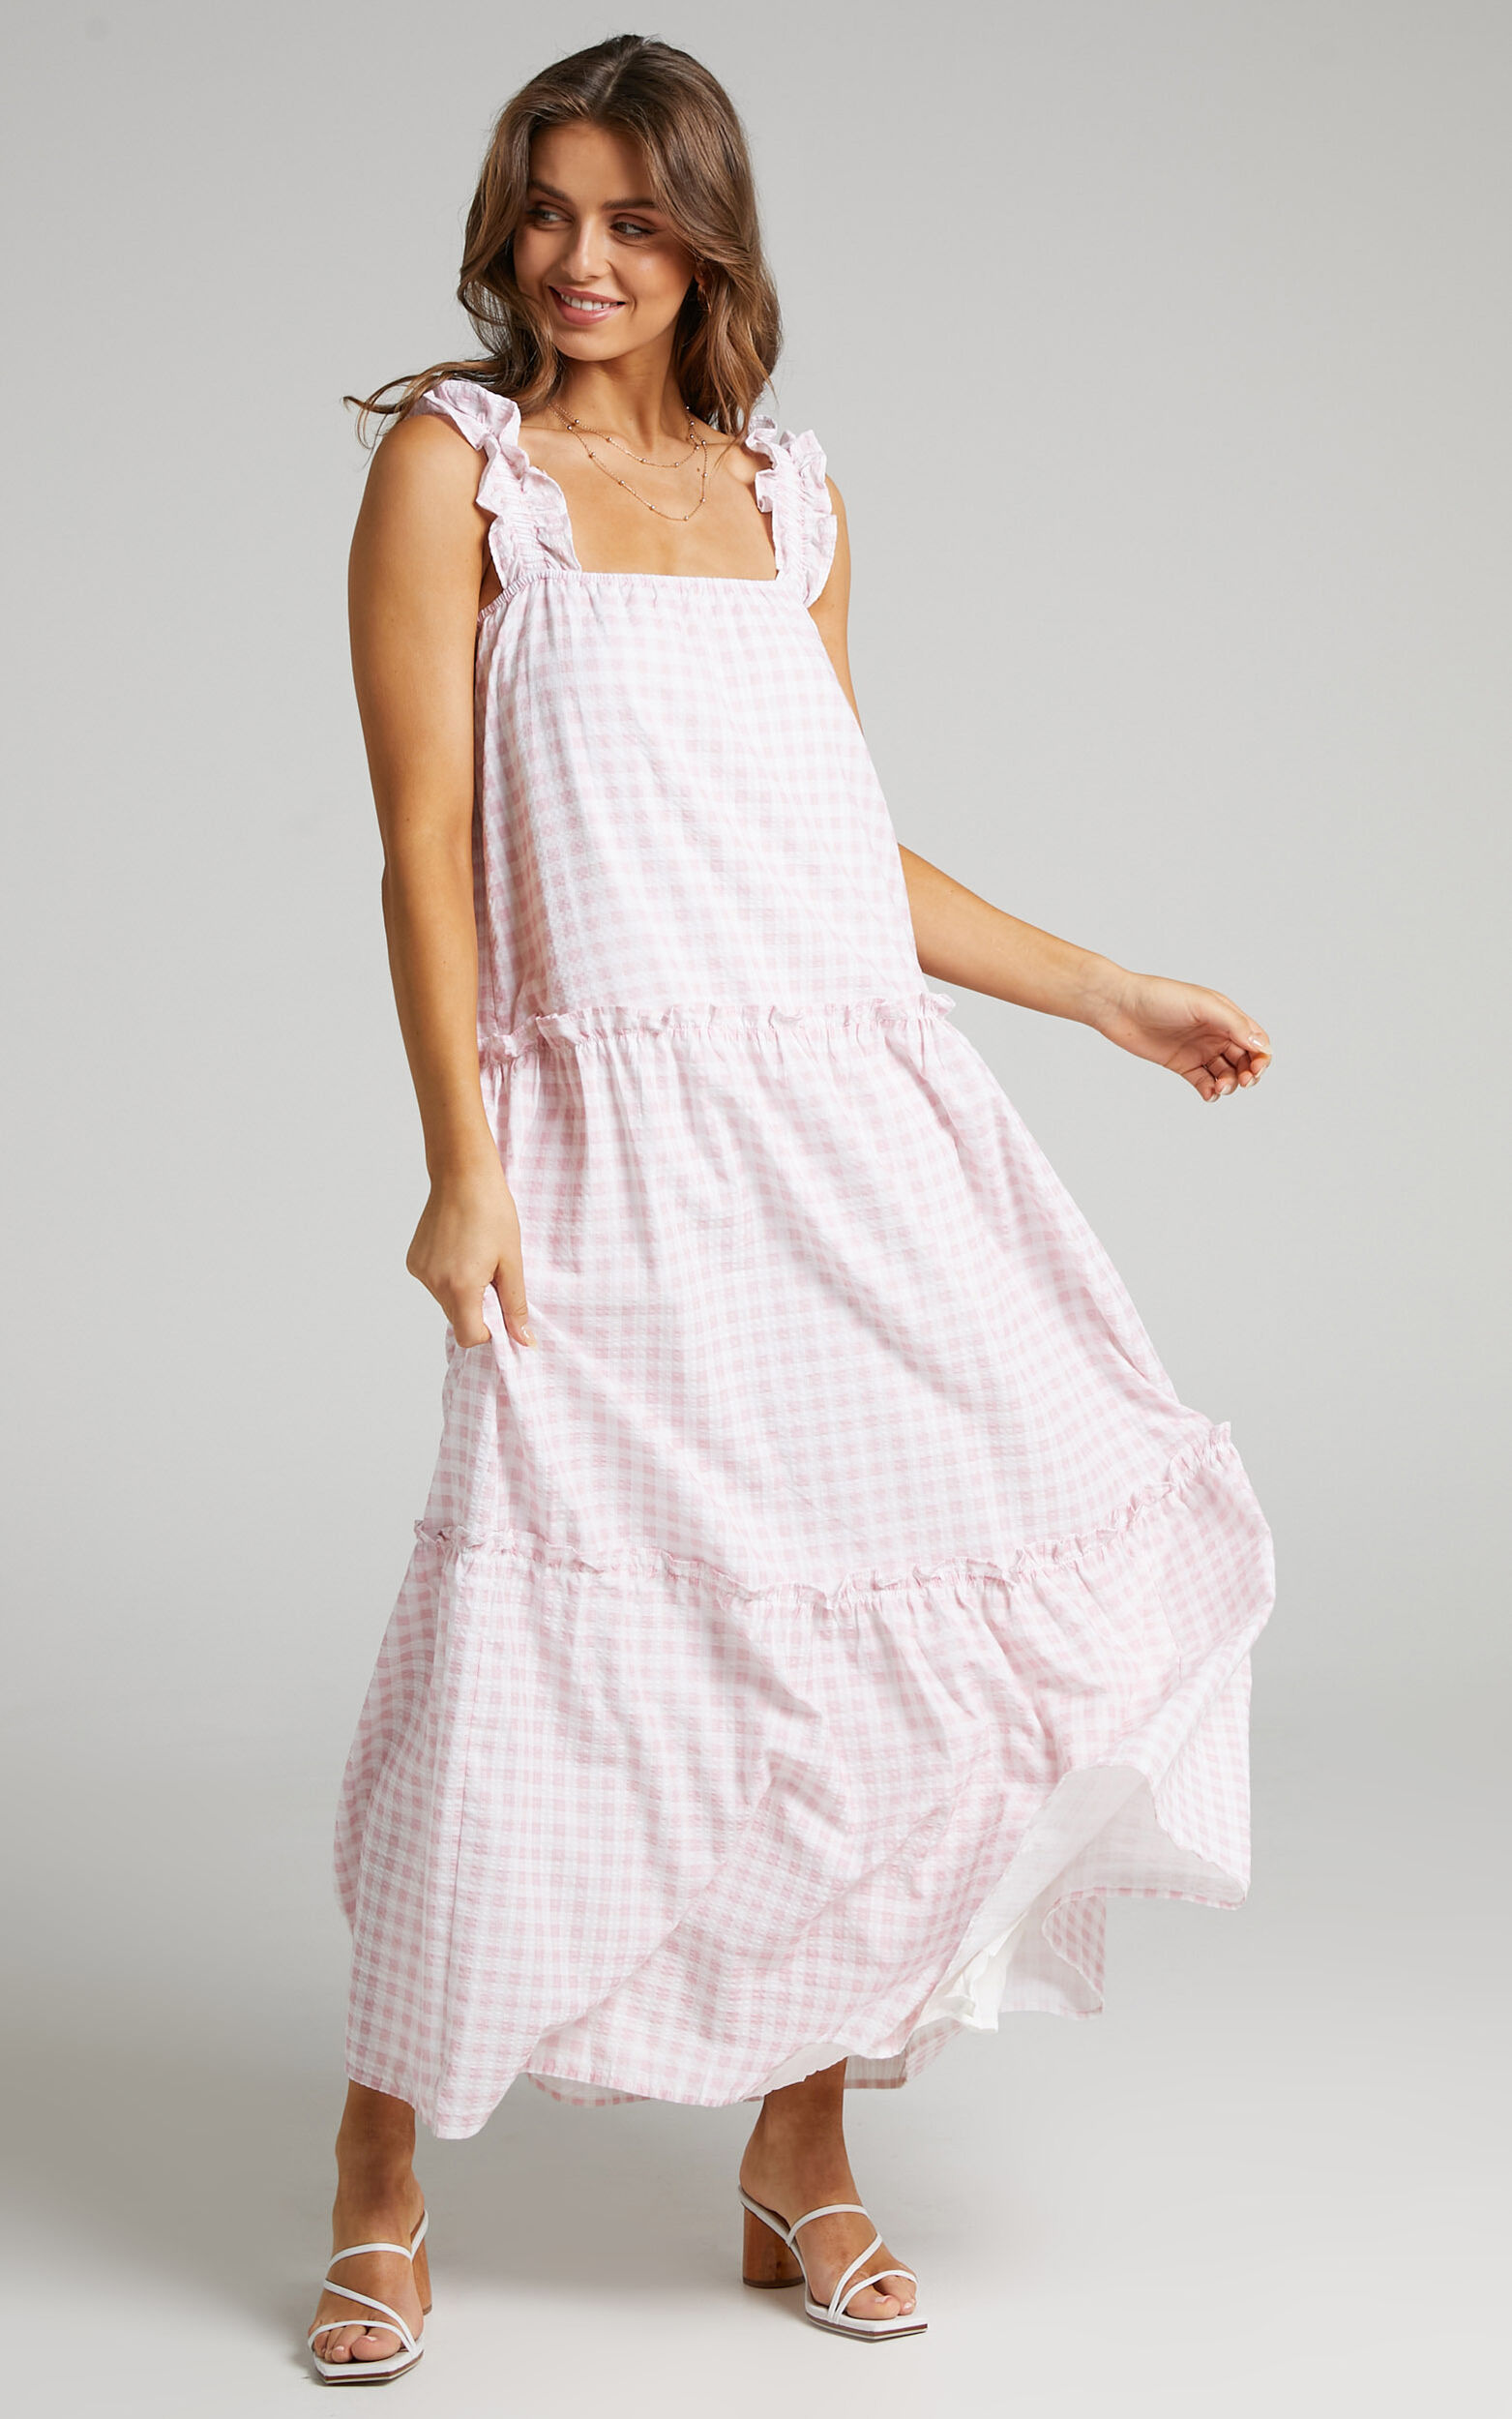 Charlie Holiday - Lottie Maxi Dress in Pink Gingham - L, PNK1